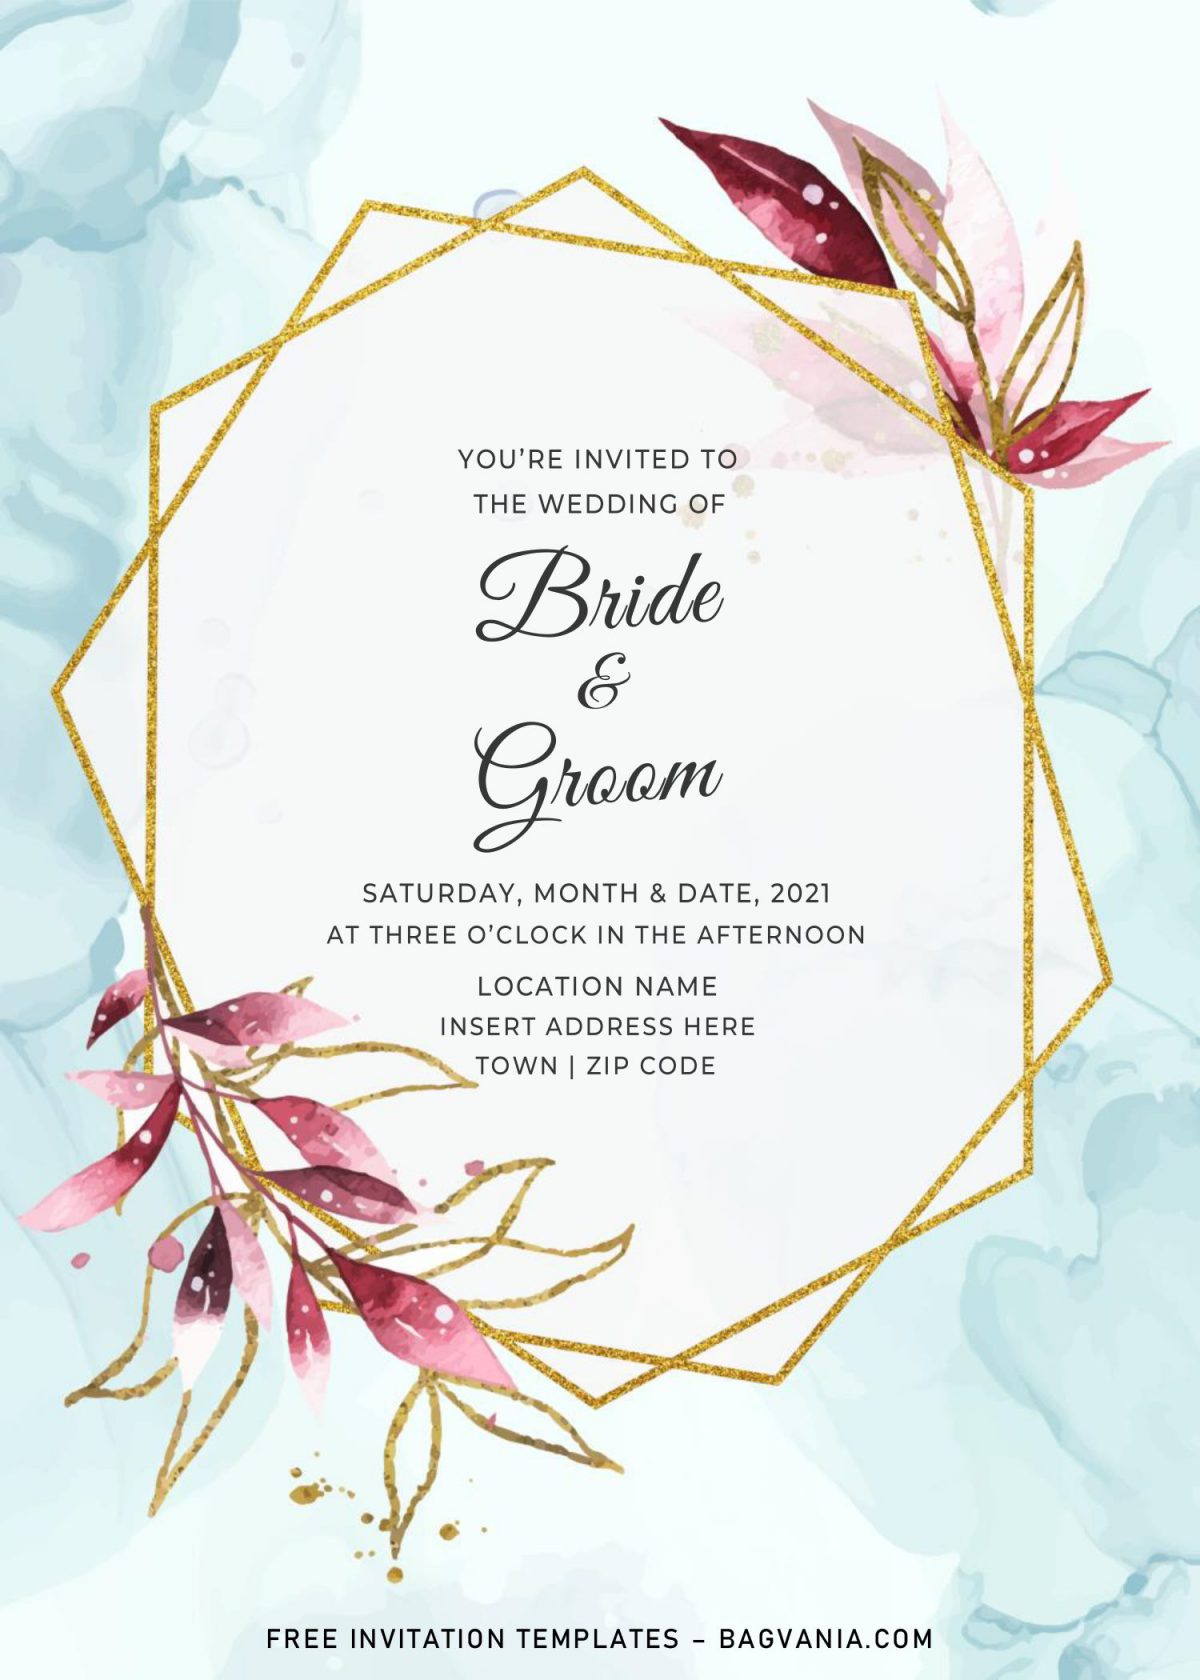 Free Gold Boho Wedding Invitation Templates For Word and has blue and green color combination background